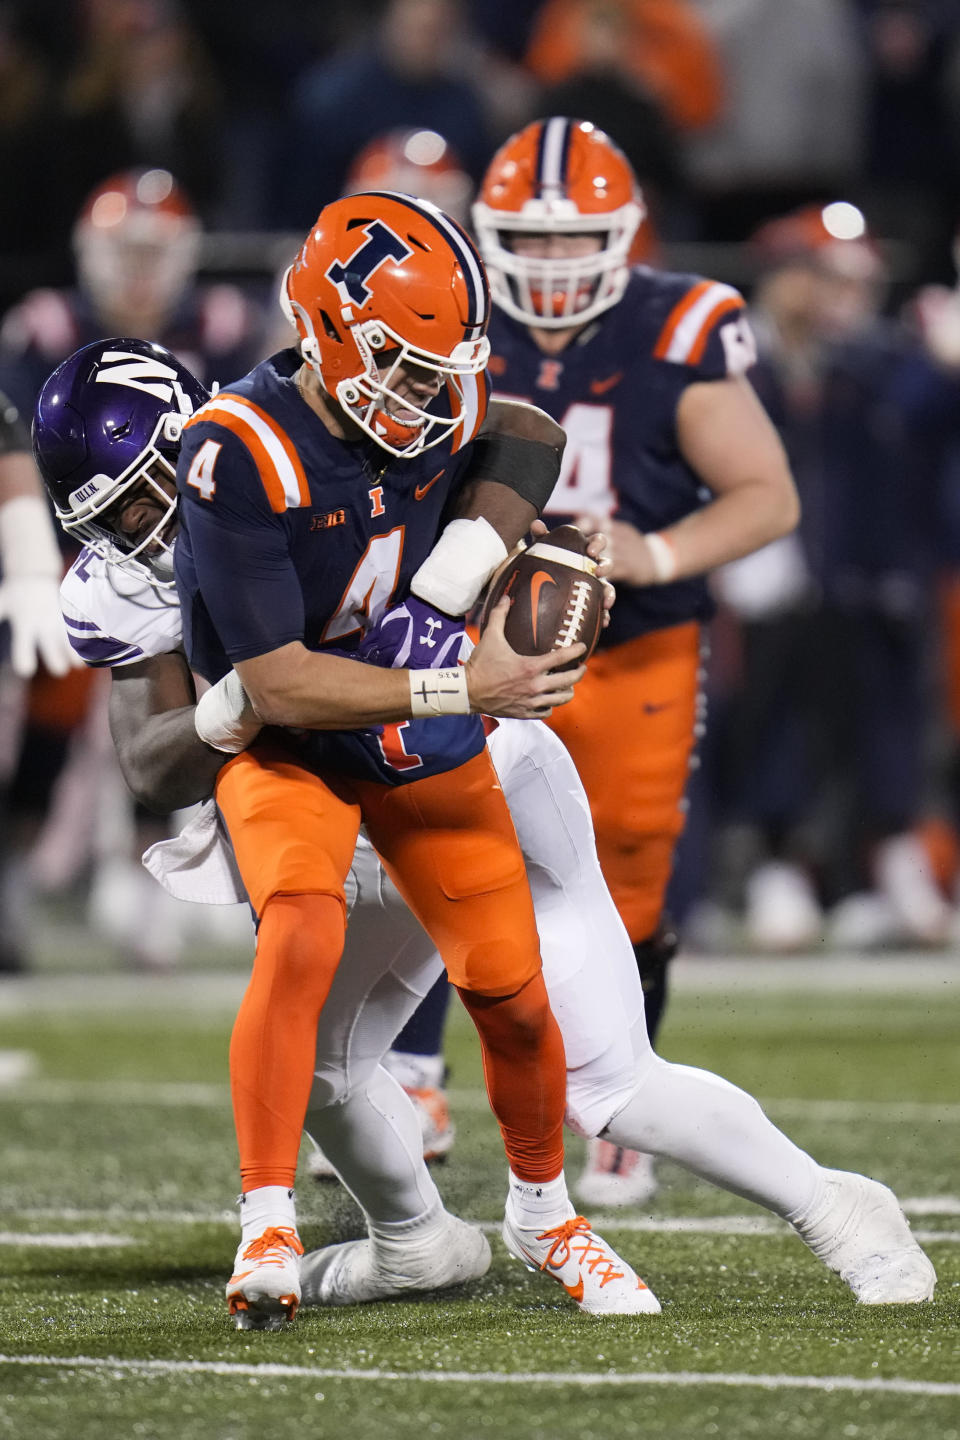 Northwestern defensive lineman Anto Saka, back left, tackles Illinois quarterback John Paddock (4) during the second half of an NCAA college football game Saturday, Nov. 25, 2023, in Champaign, Ill. (AP Photo/Erin Hooley)